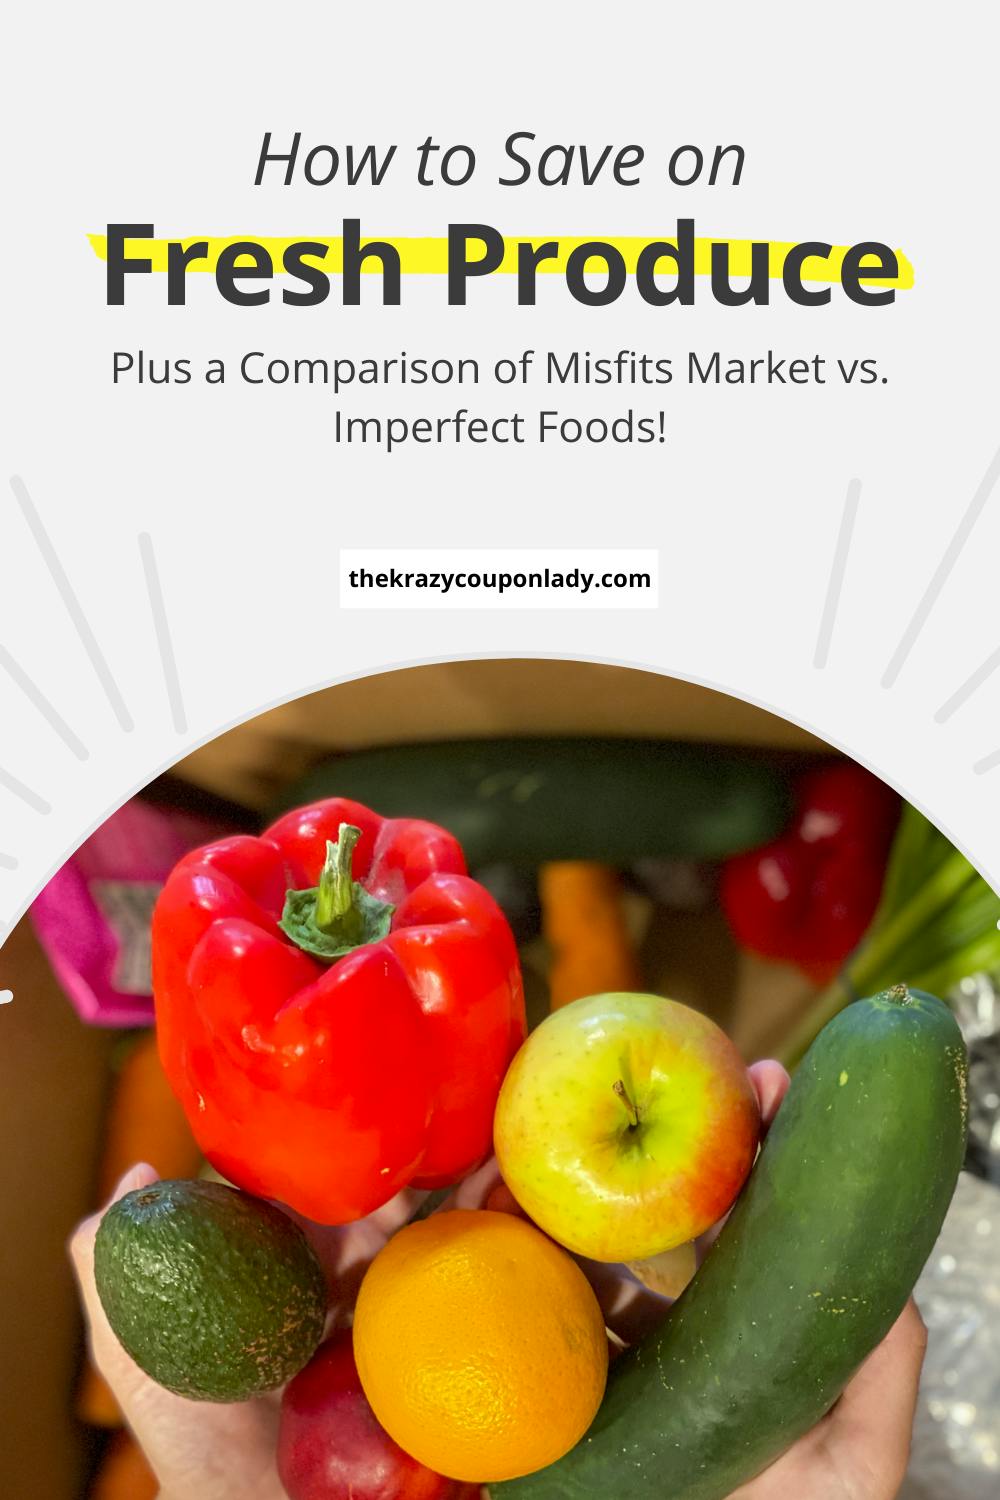 Misfits Market vs. Imperfect Foods: Comparing Apples to Apples